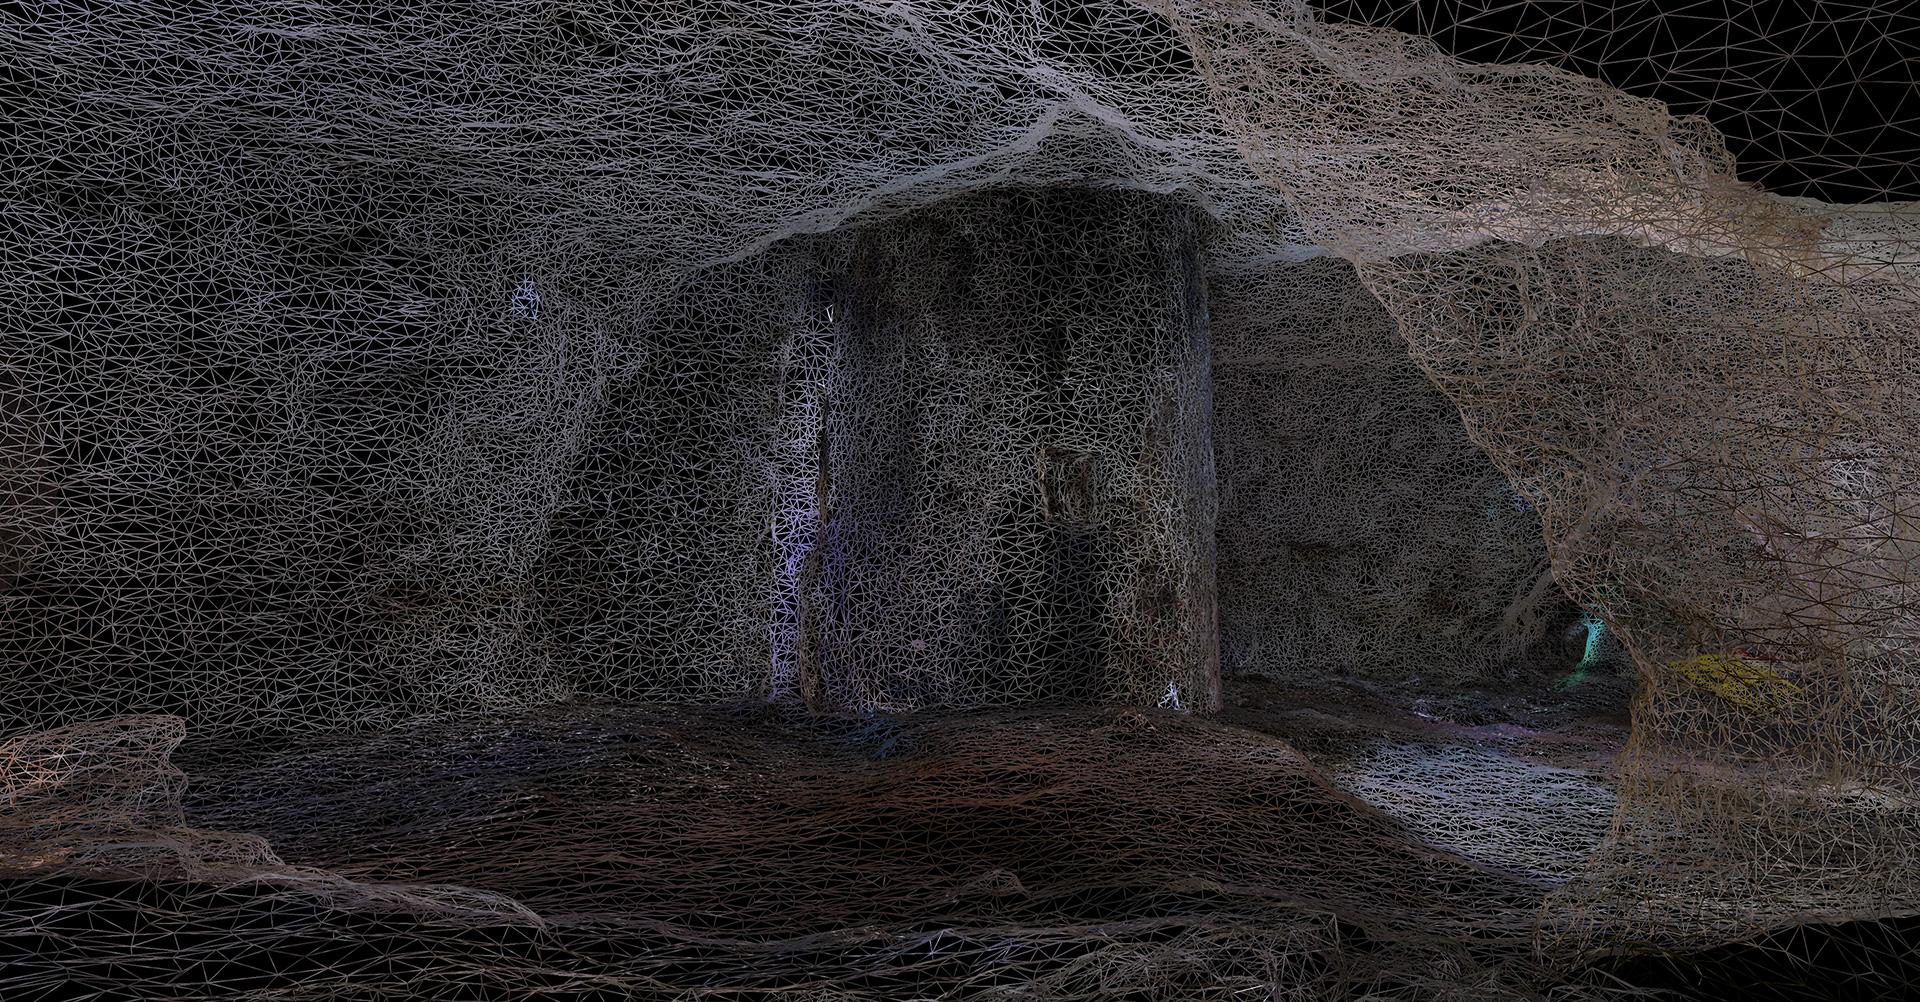 3D model of an underground quarry in Orléans